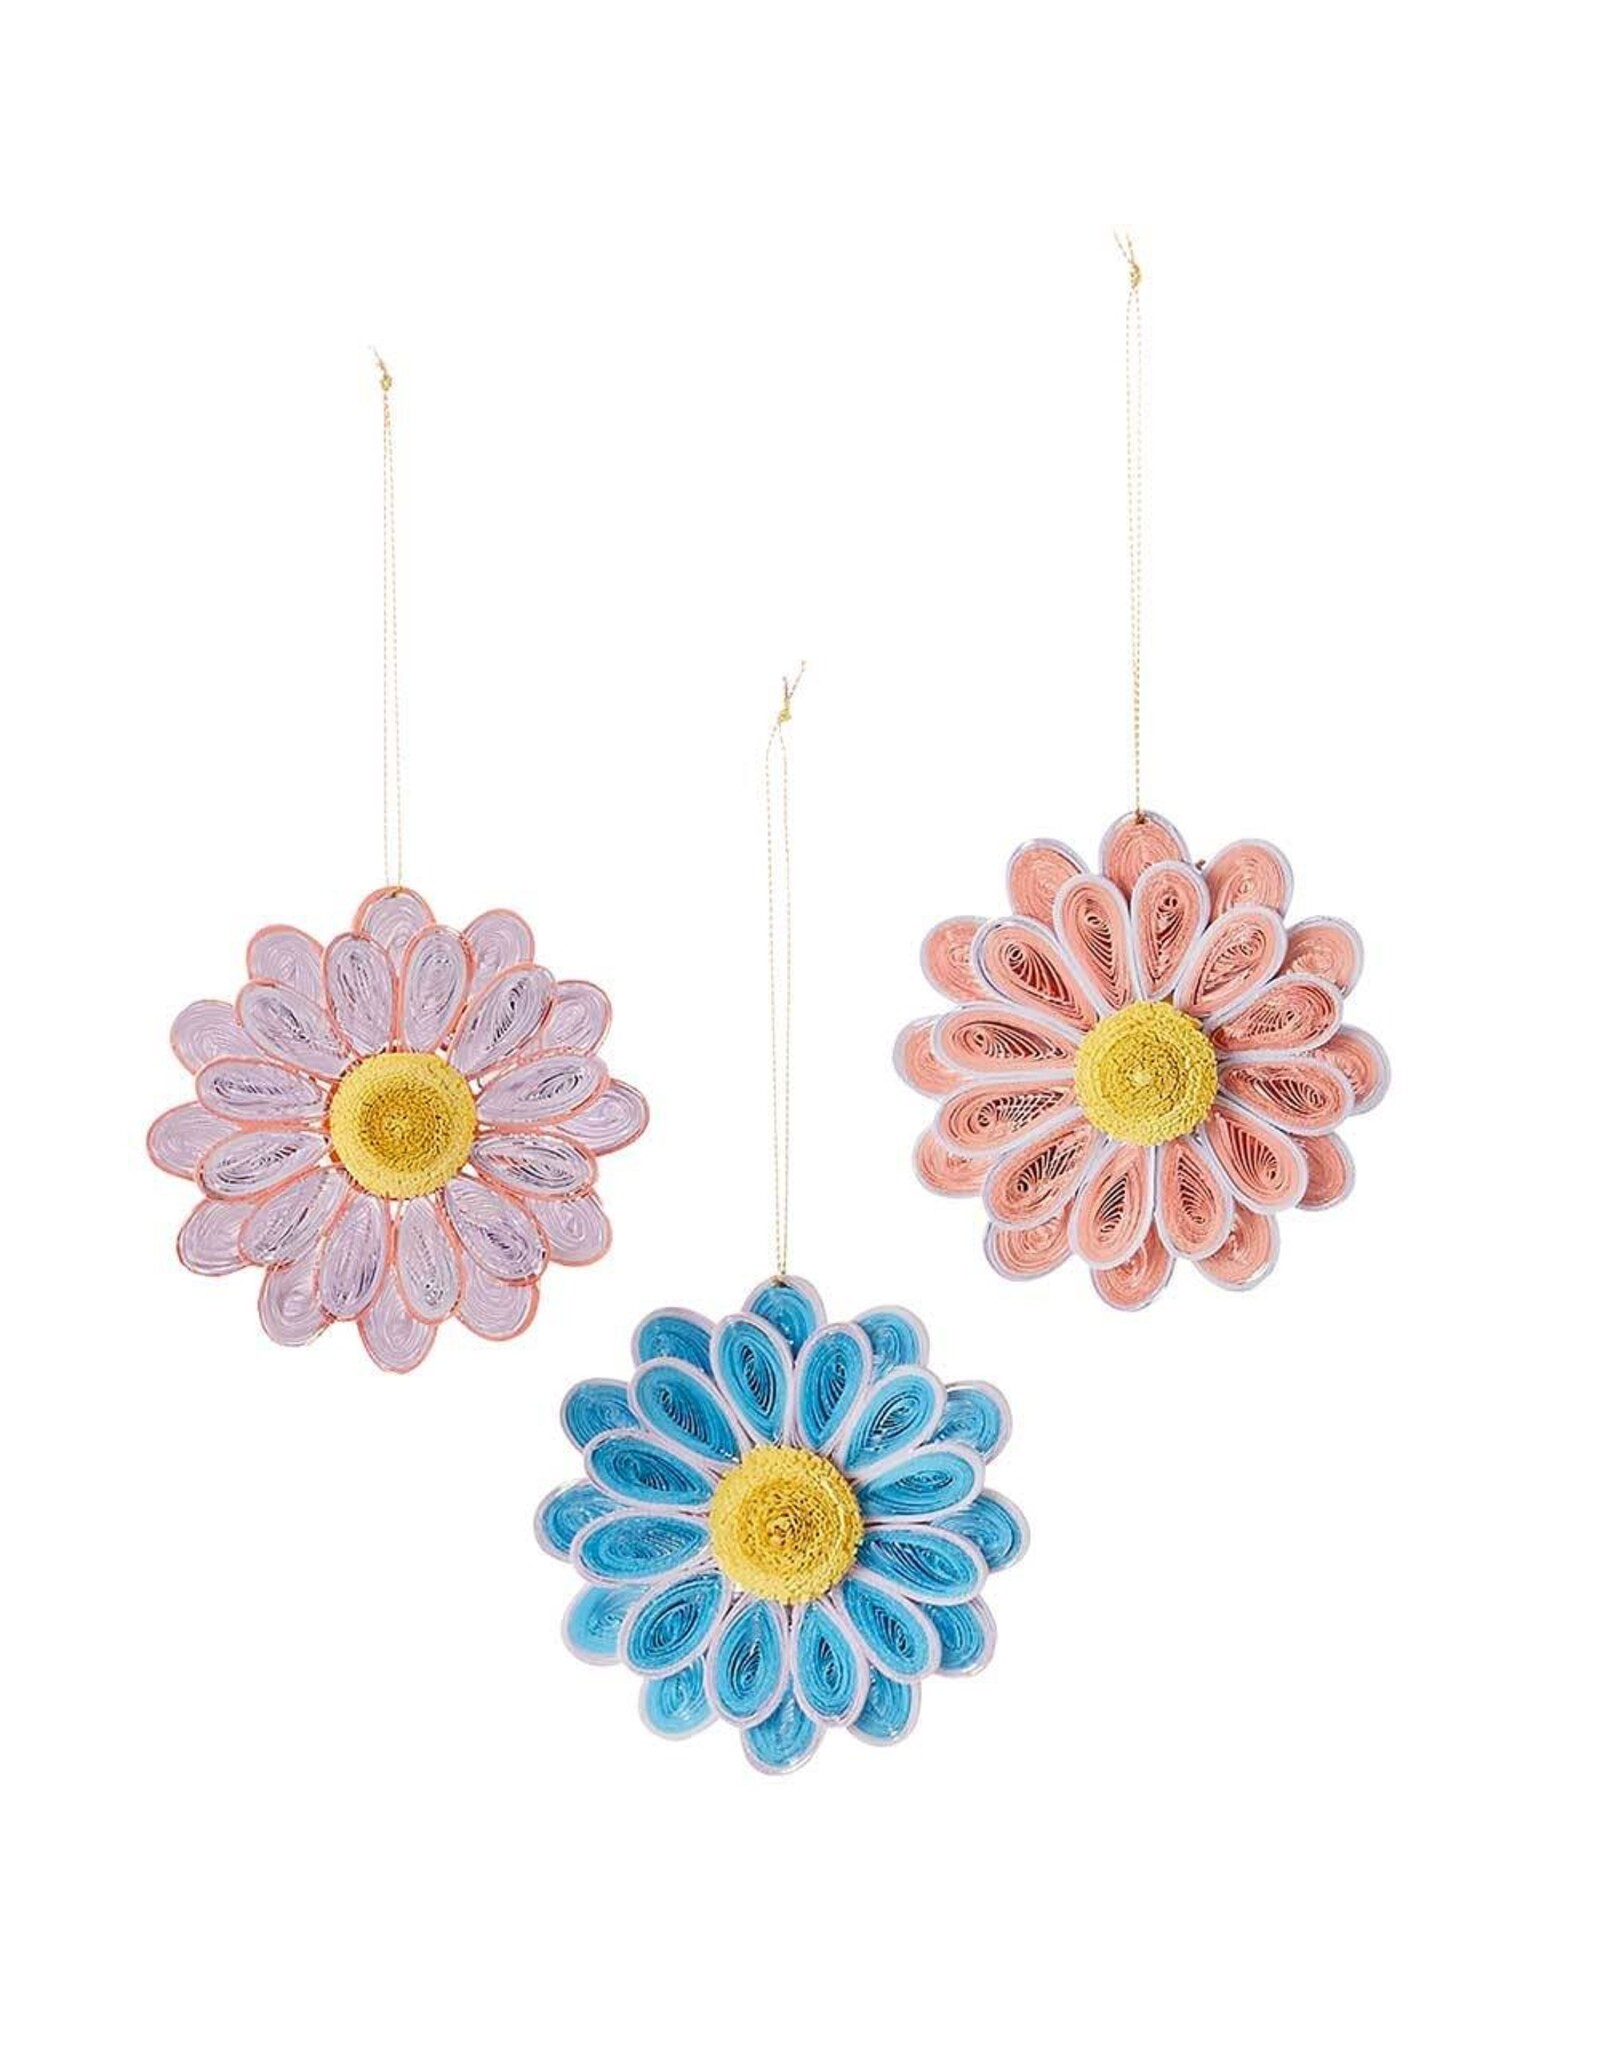 Quilled Daisy Ornaments , Vietnam